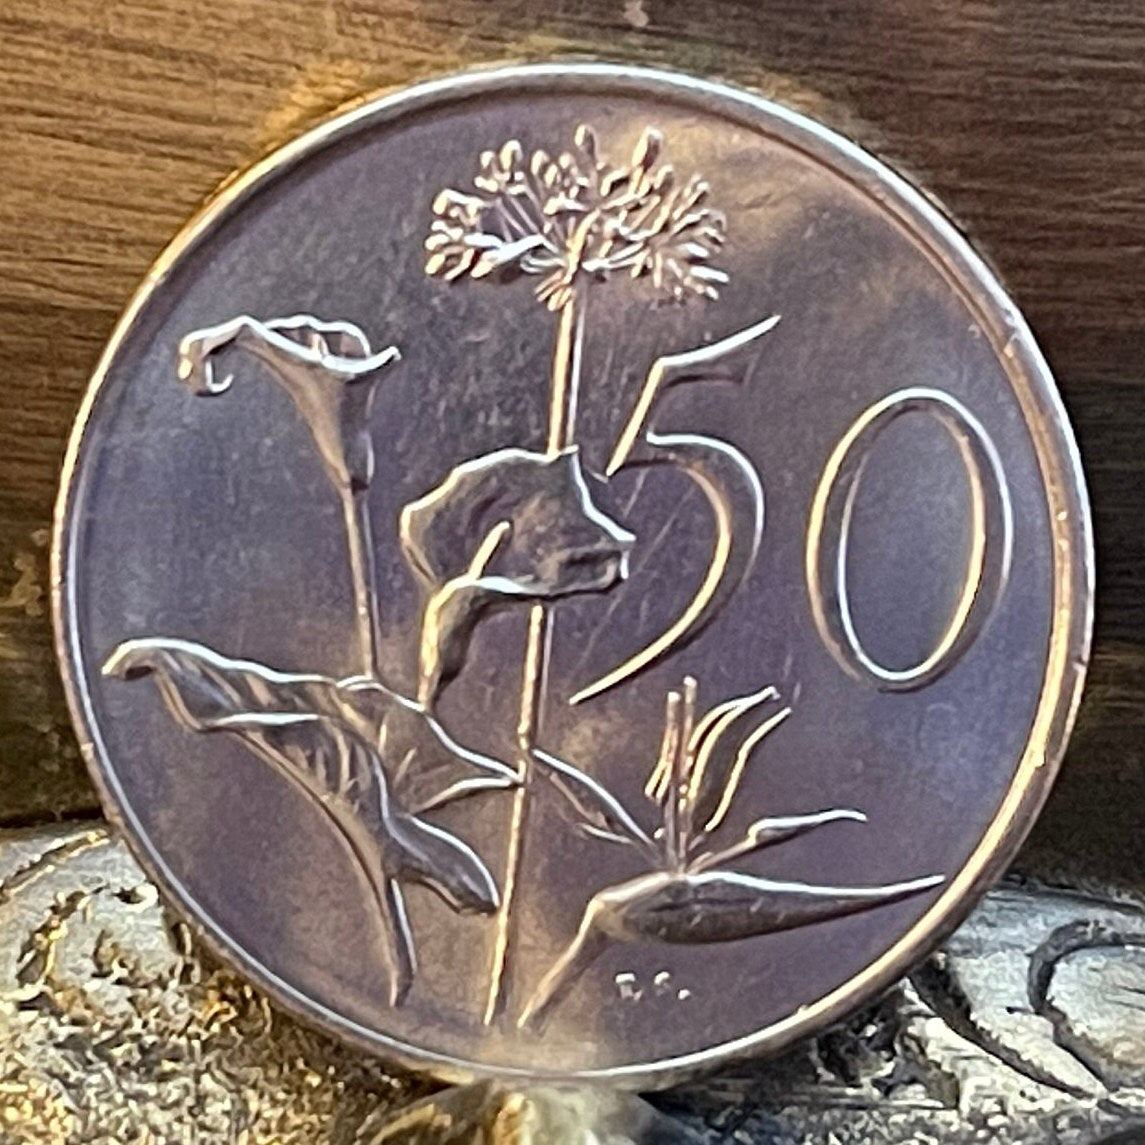 Calla Lily, African Lily, Bird of Paradise Flower 50 Cents South Africa Authentic Coin Money for Jewelry (Arum Lily) (Crane Flower)